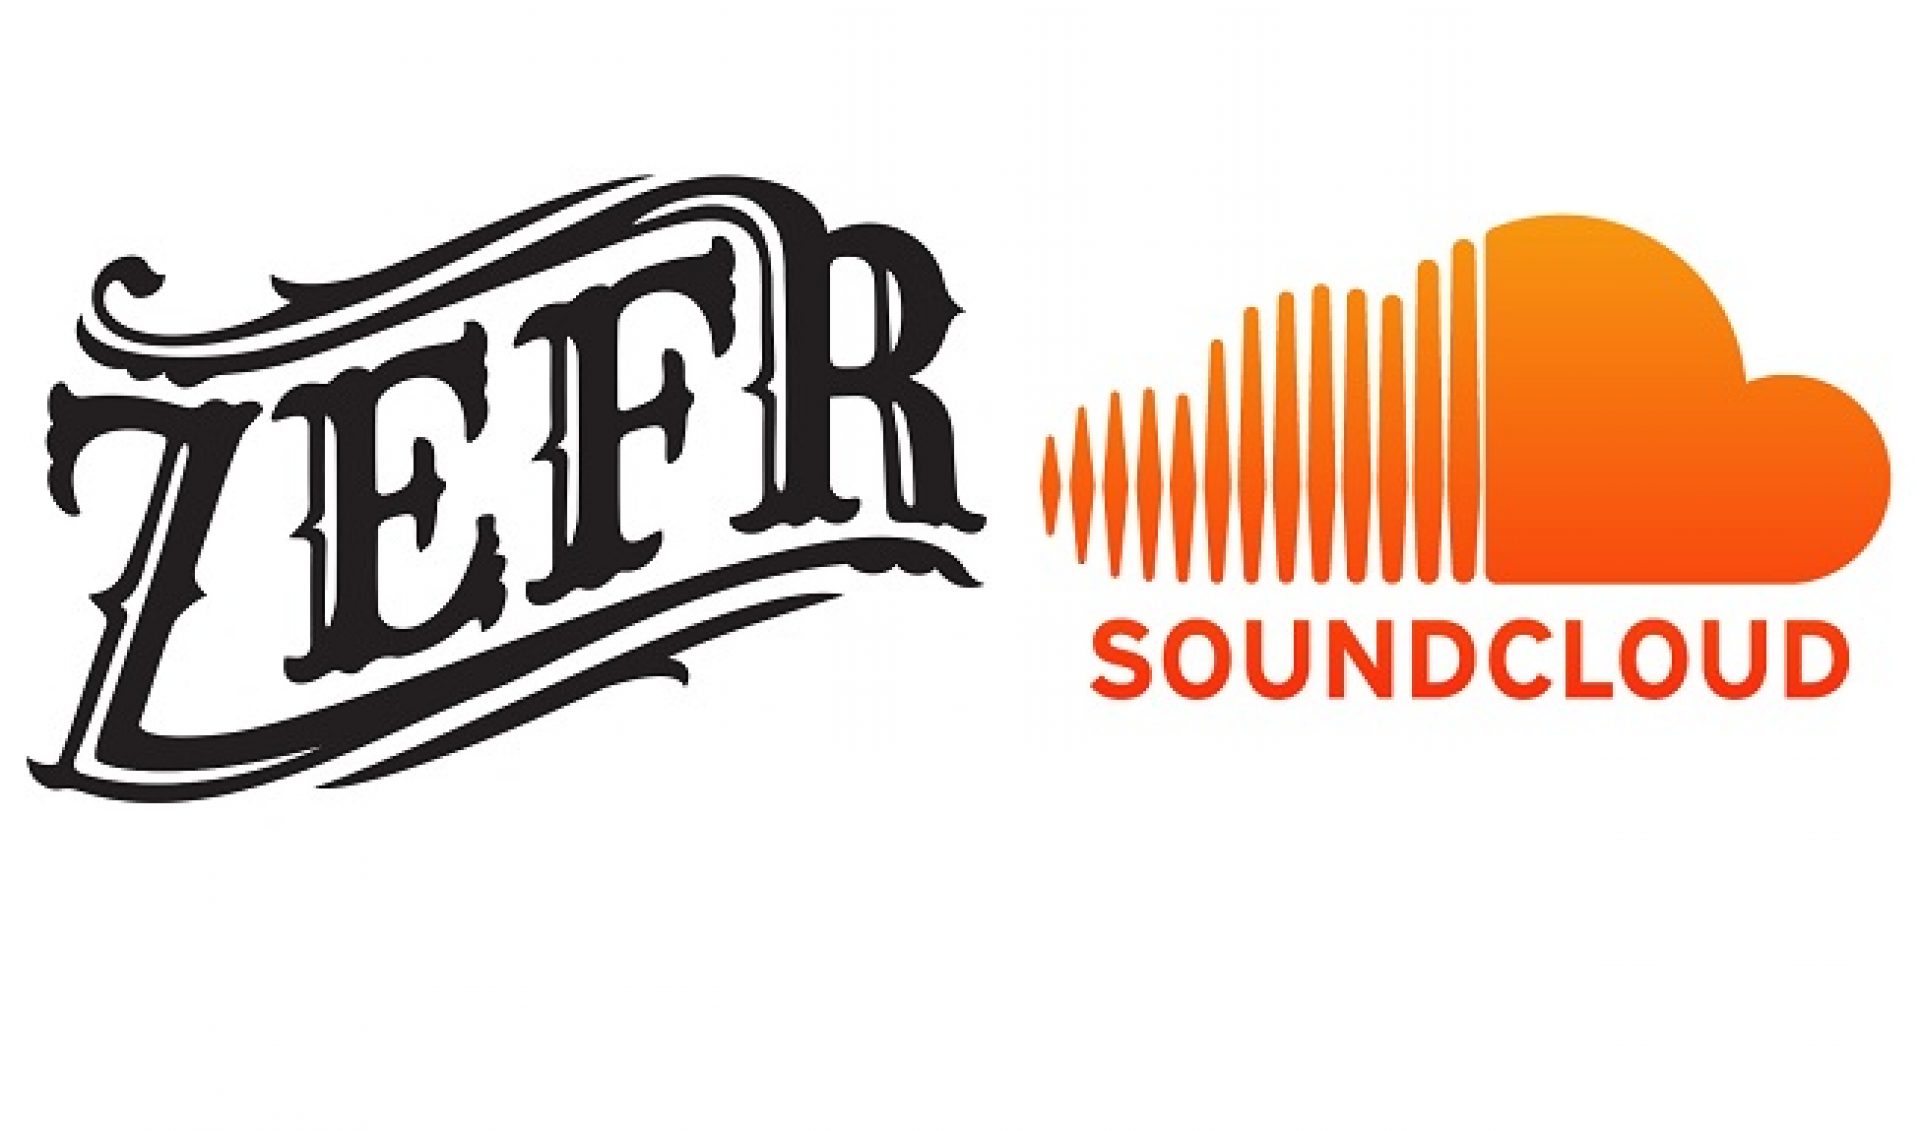 ZEFR Will Help SoundCloud With Copyright, Advertising Opportunities